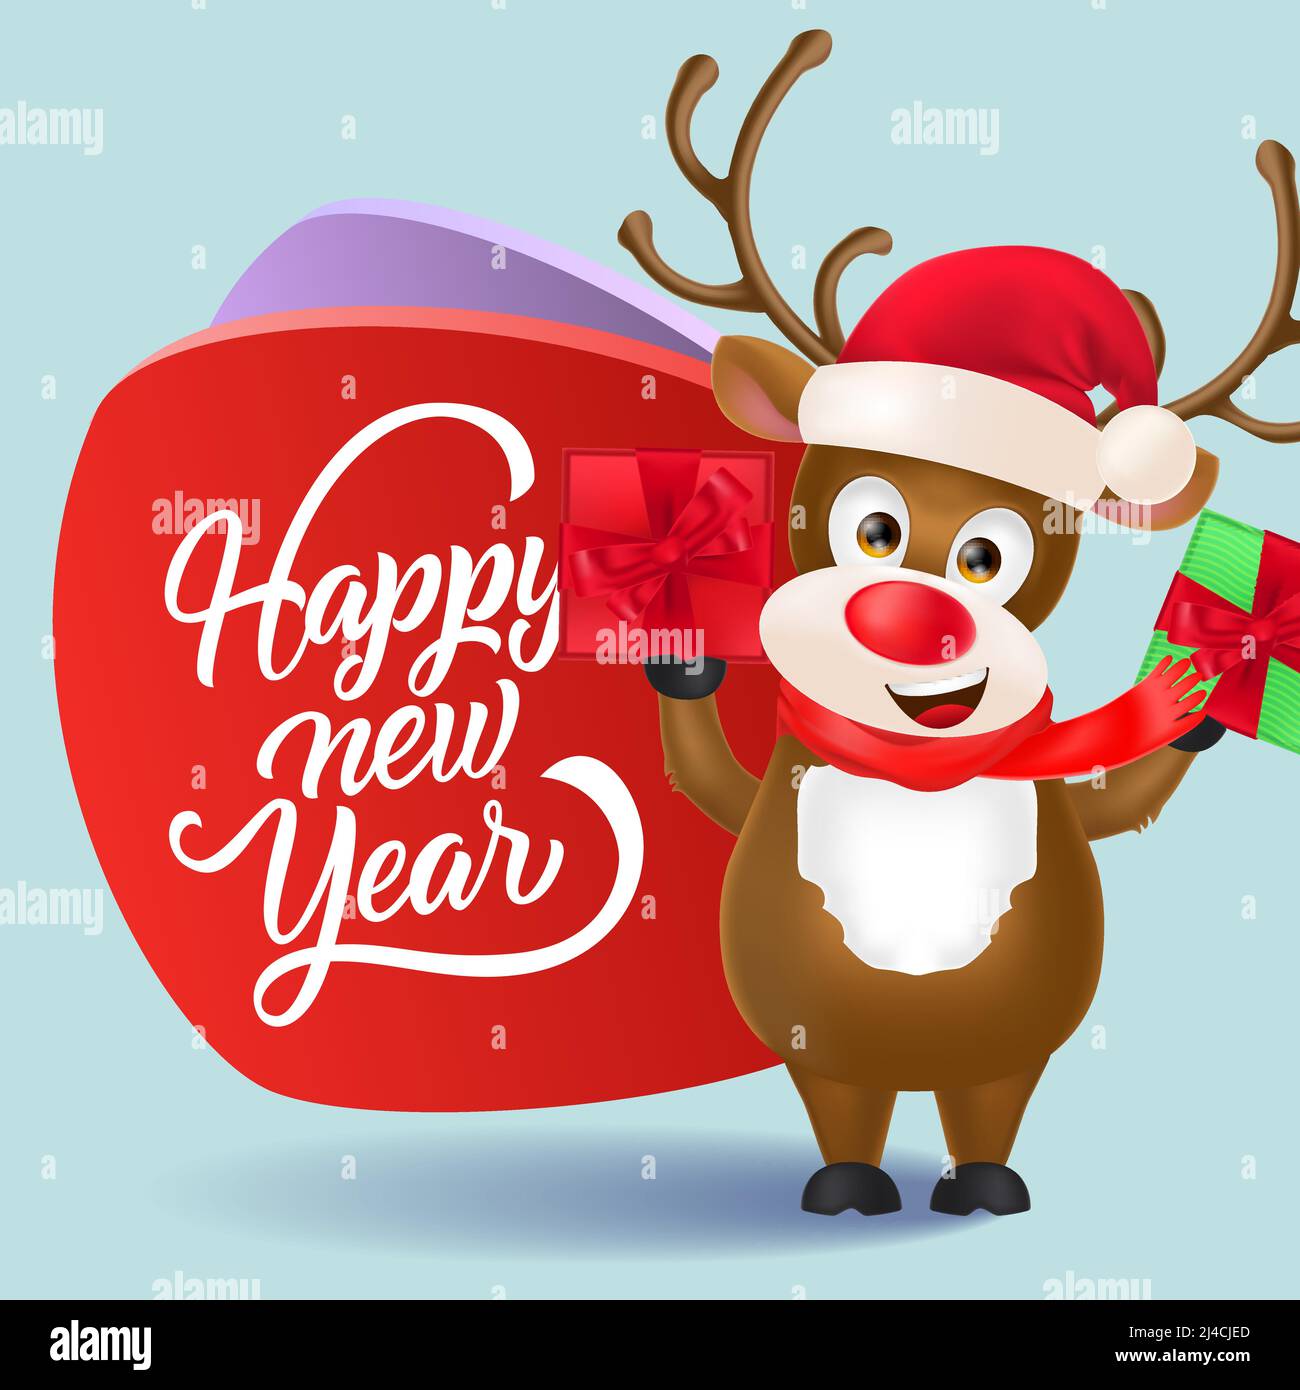 Vector 3 - Page - For Alamy rudolph santa and Stock Images